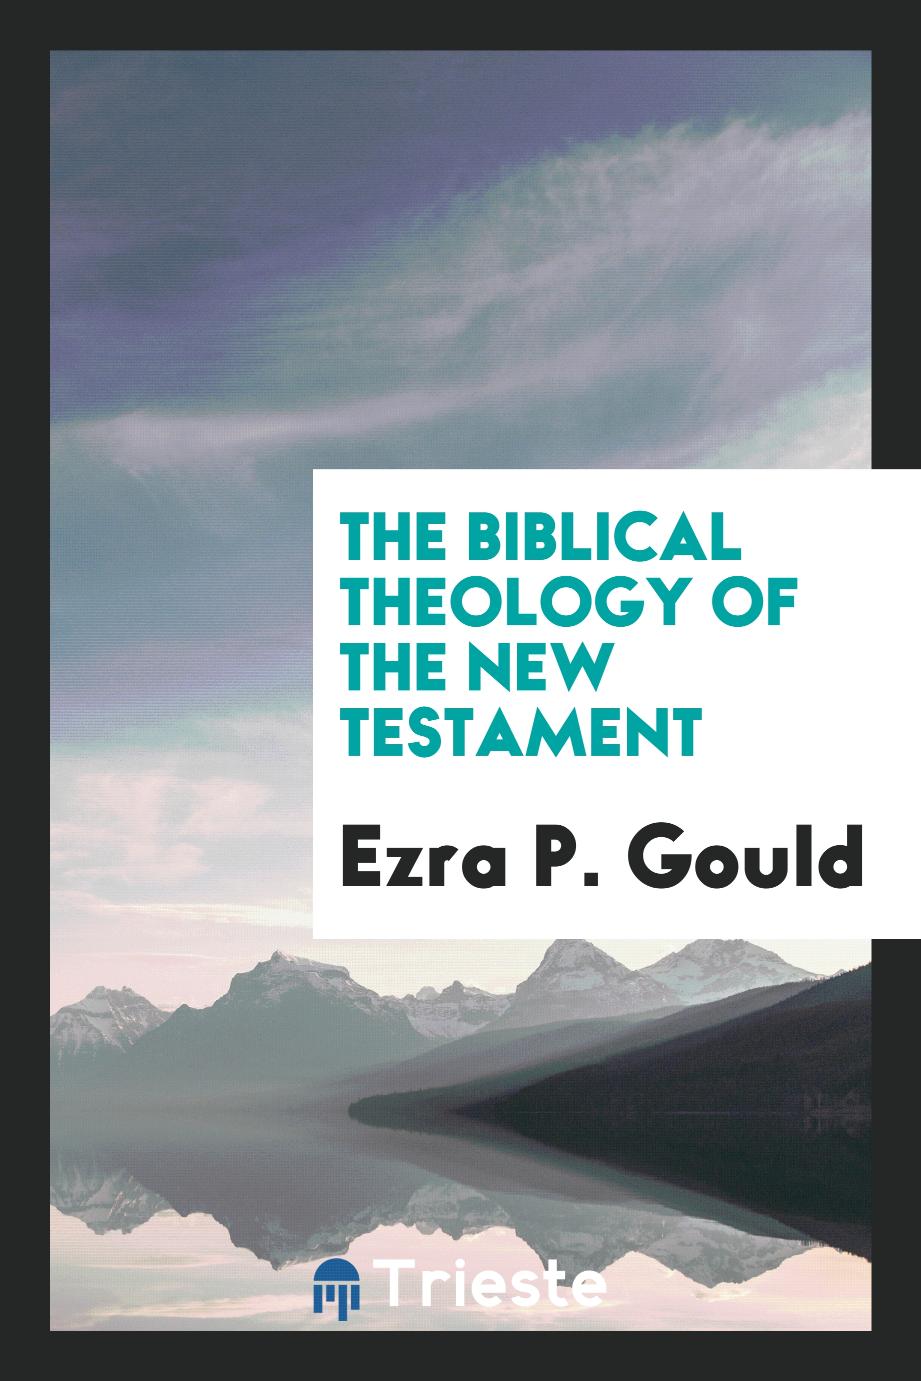 The Biblical theology of the New Testament